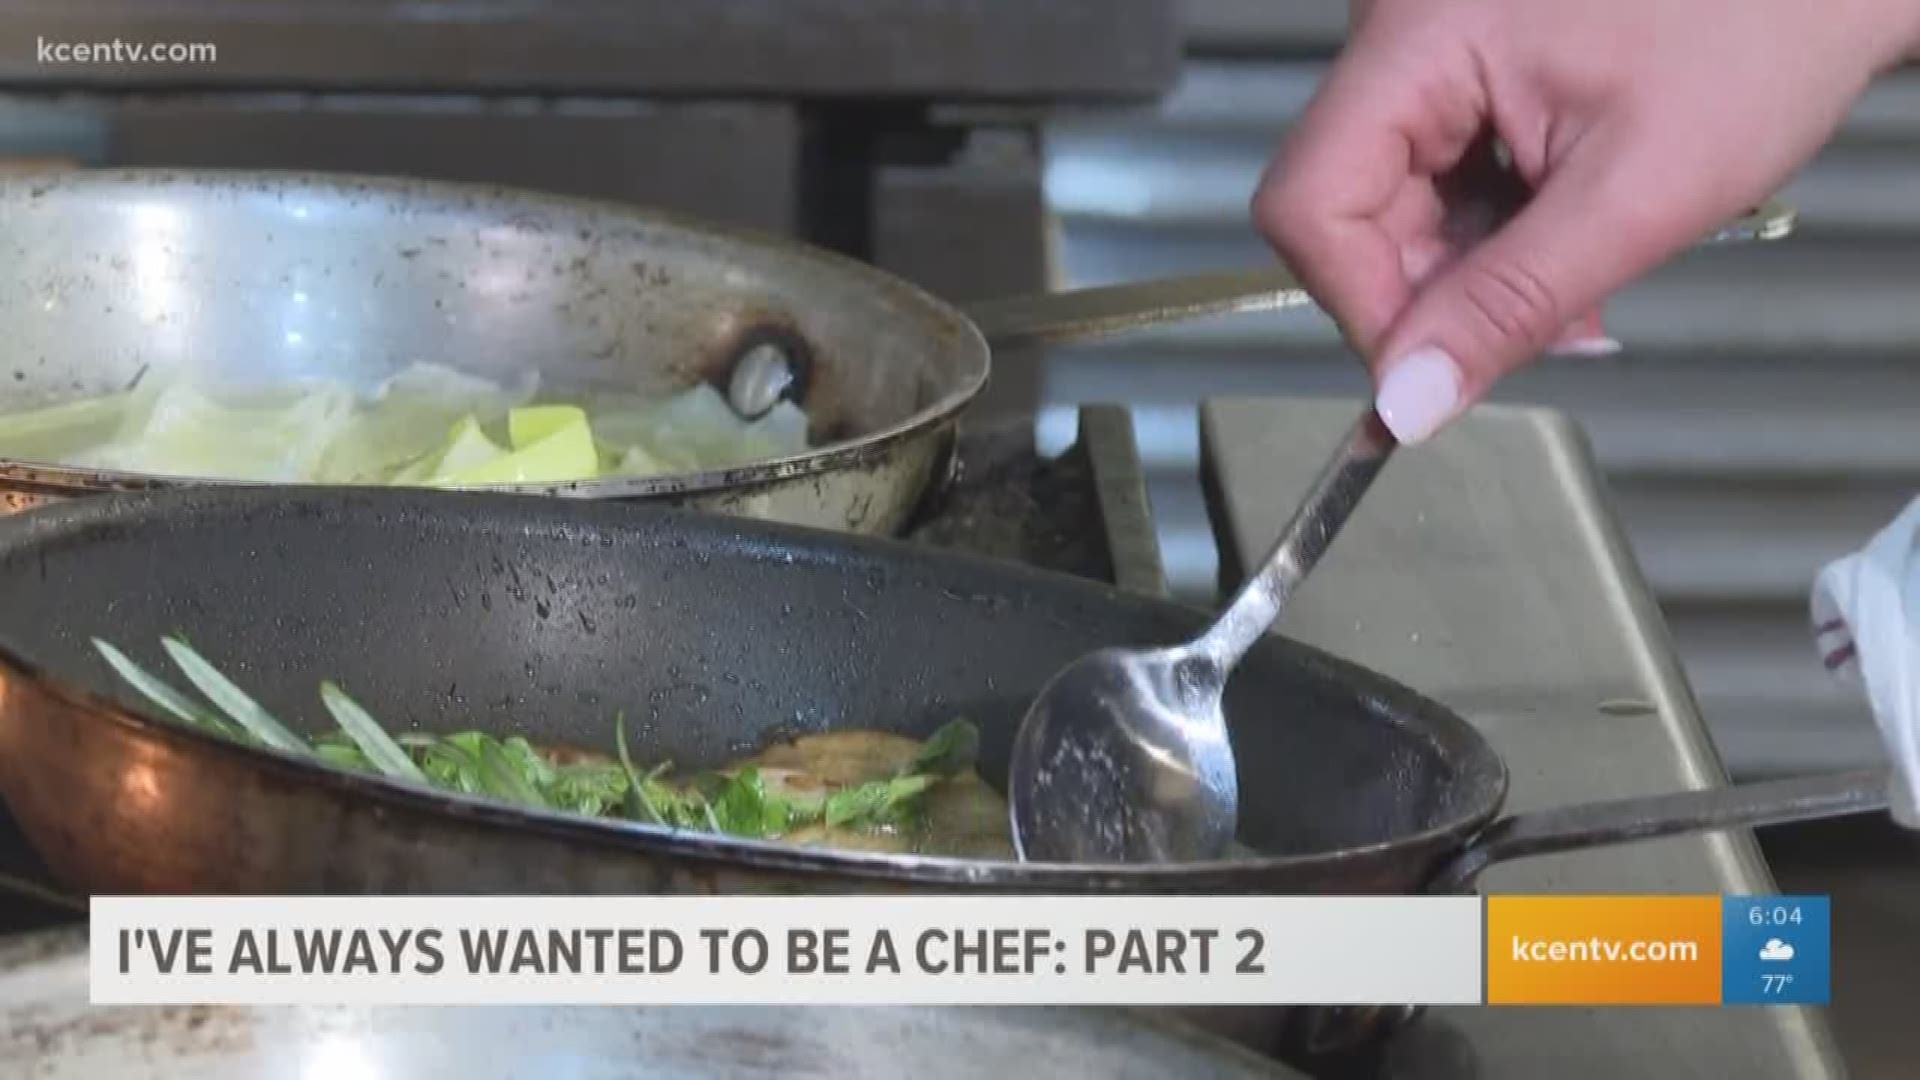 Morning anchor Heidi Alagha tried her hand in the kitchen.